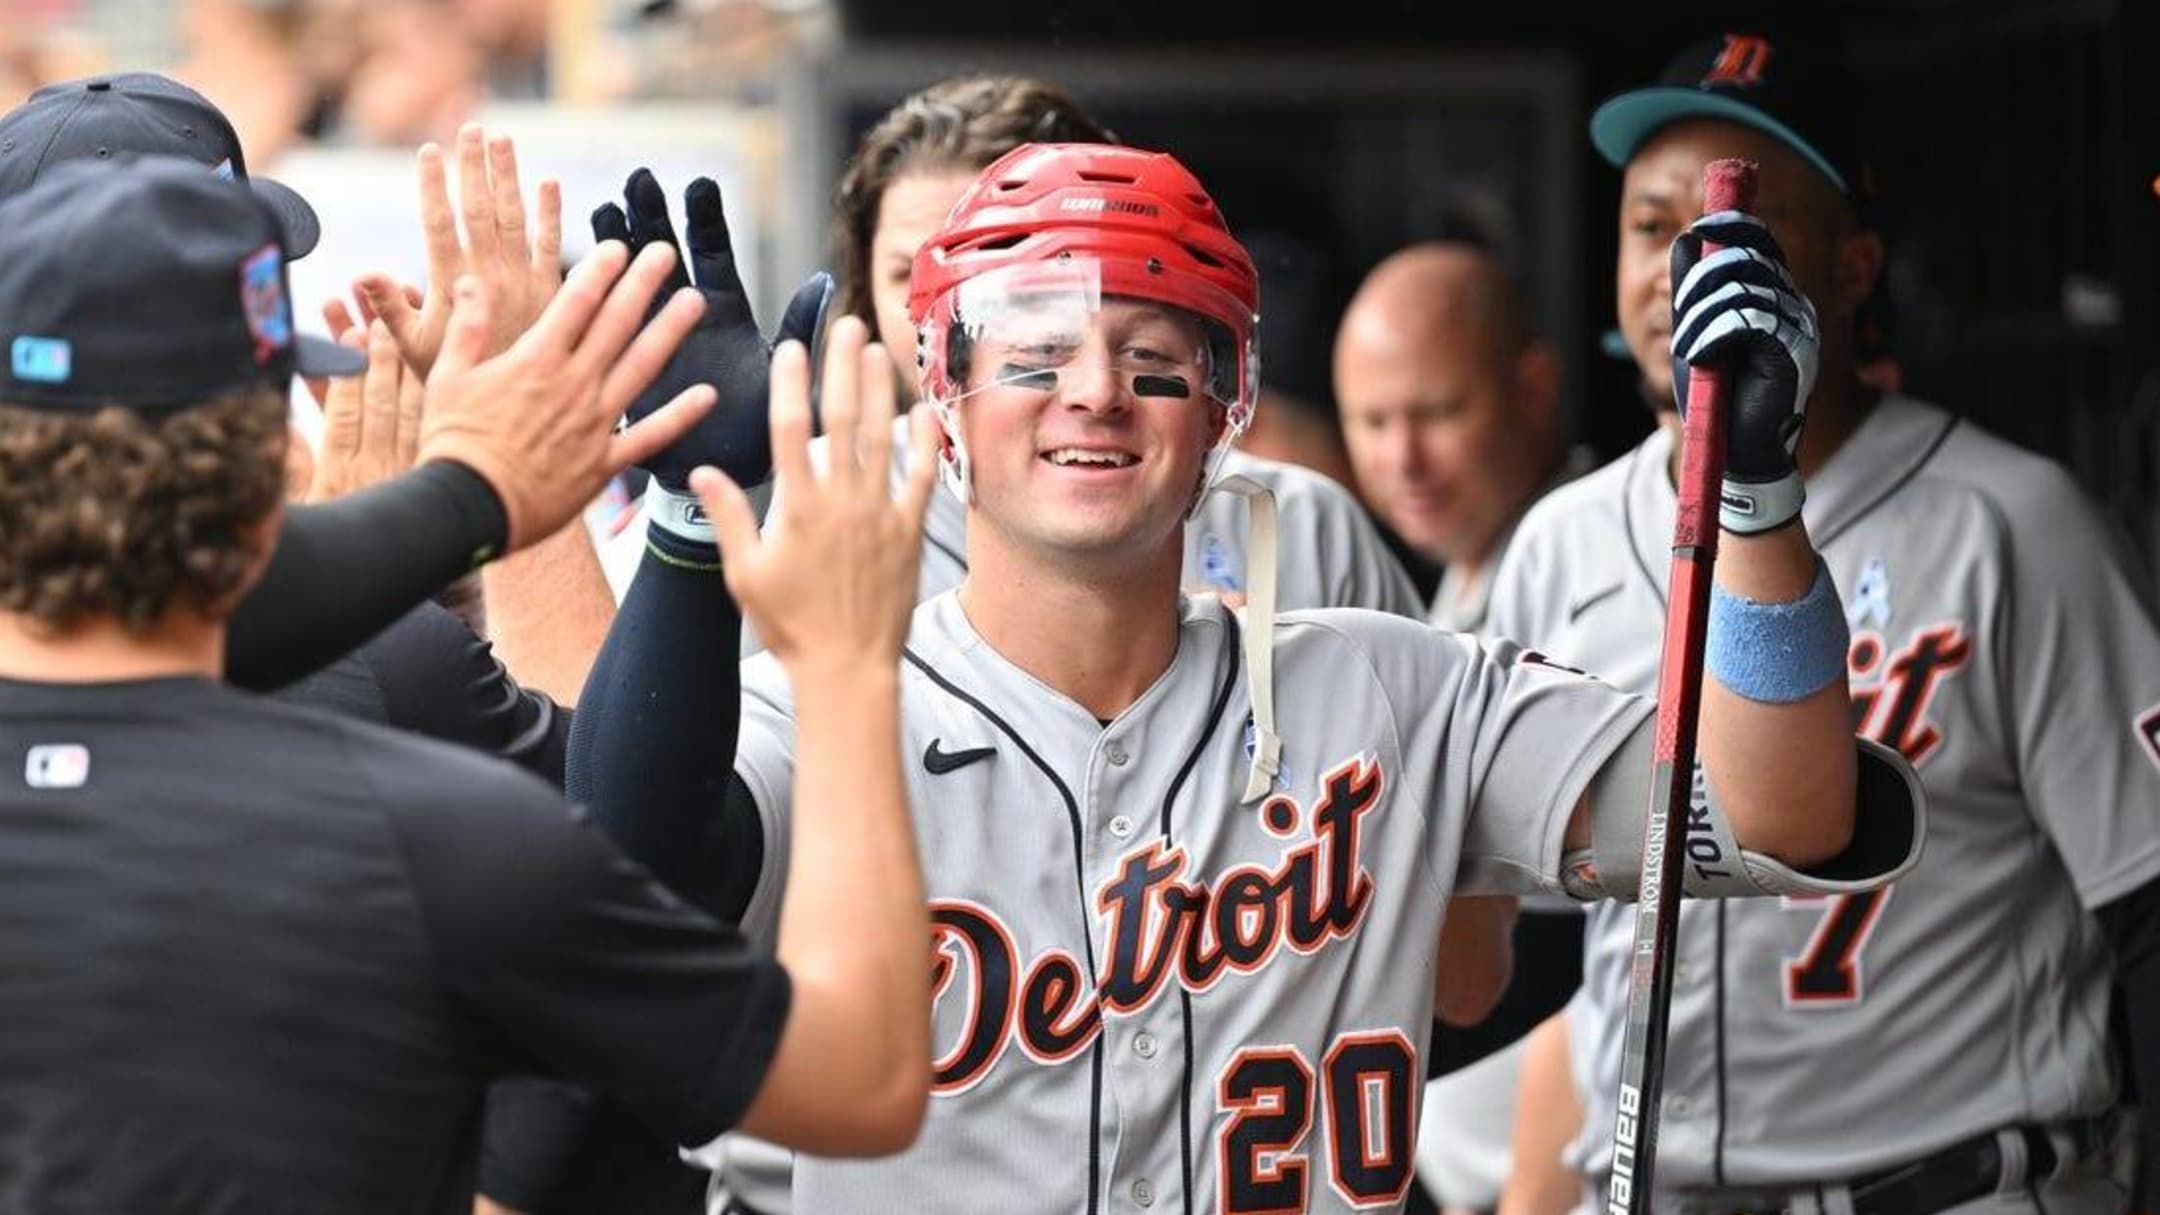 Torkelson homers, gets 3 hits to lead Tigers over Astros 6-3